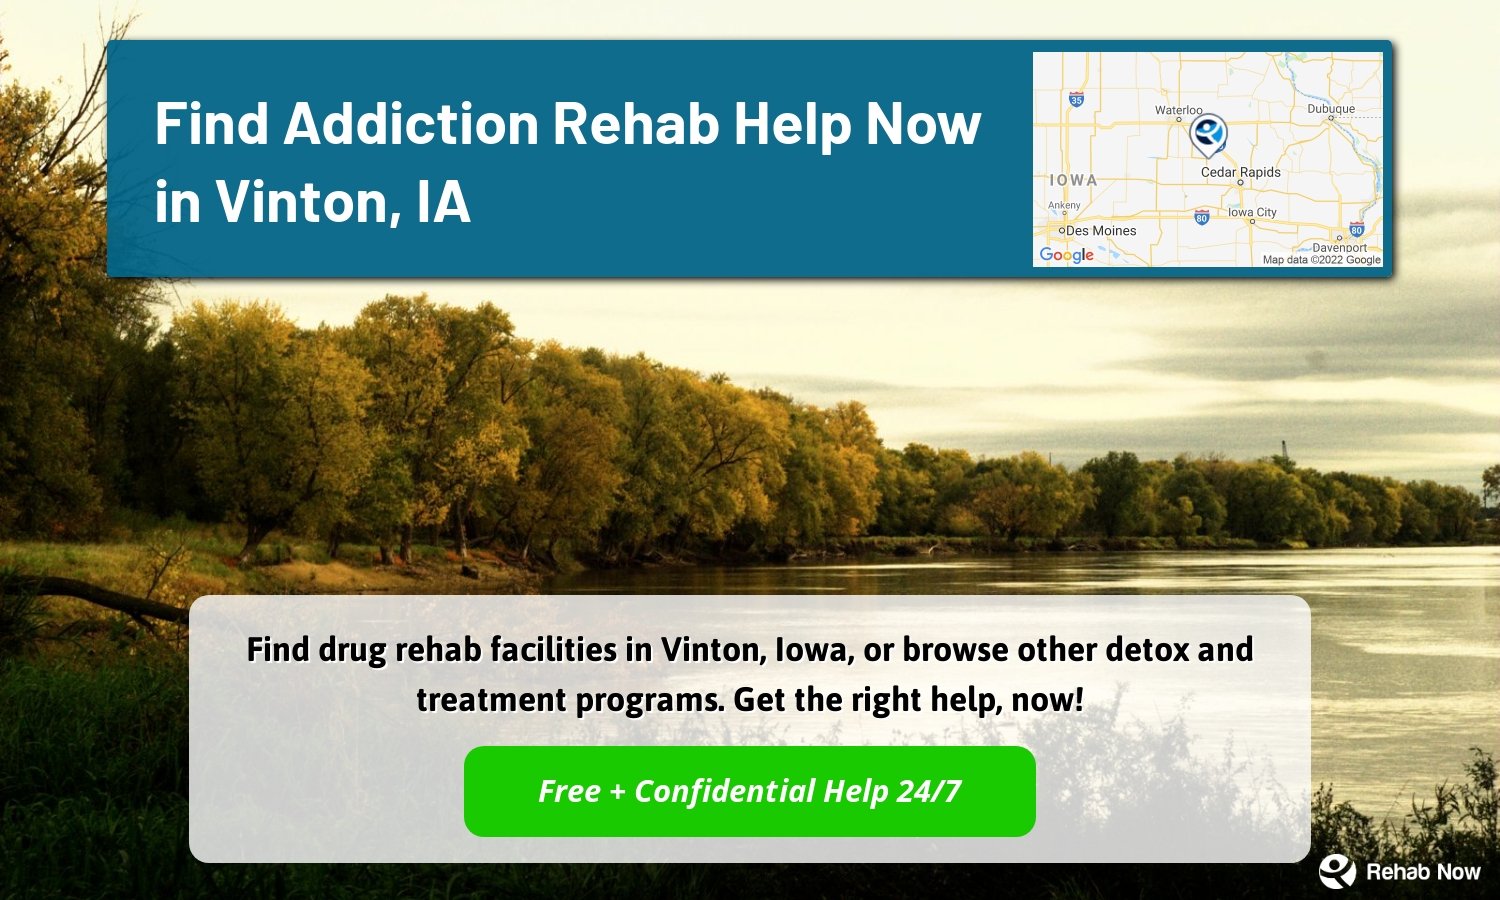 Find drug rehab facilities in Vinton, Iowa, or browse other detox and treatment programs. Get the right help, now!